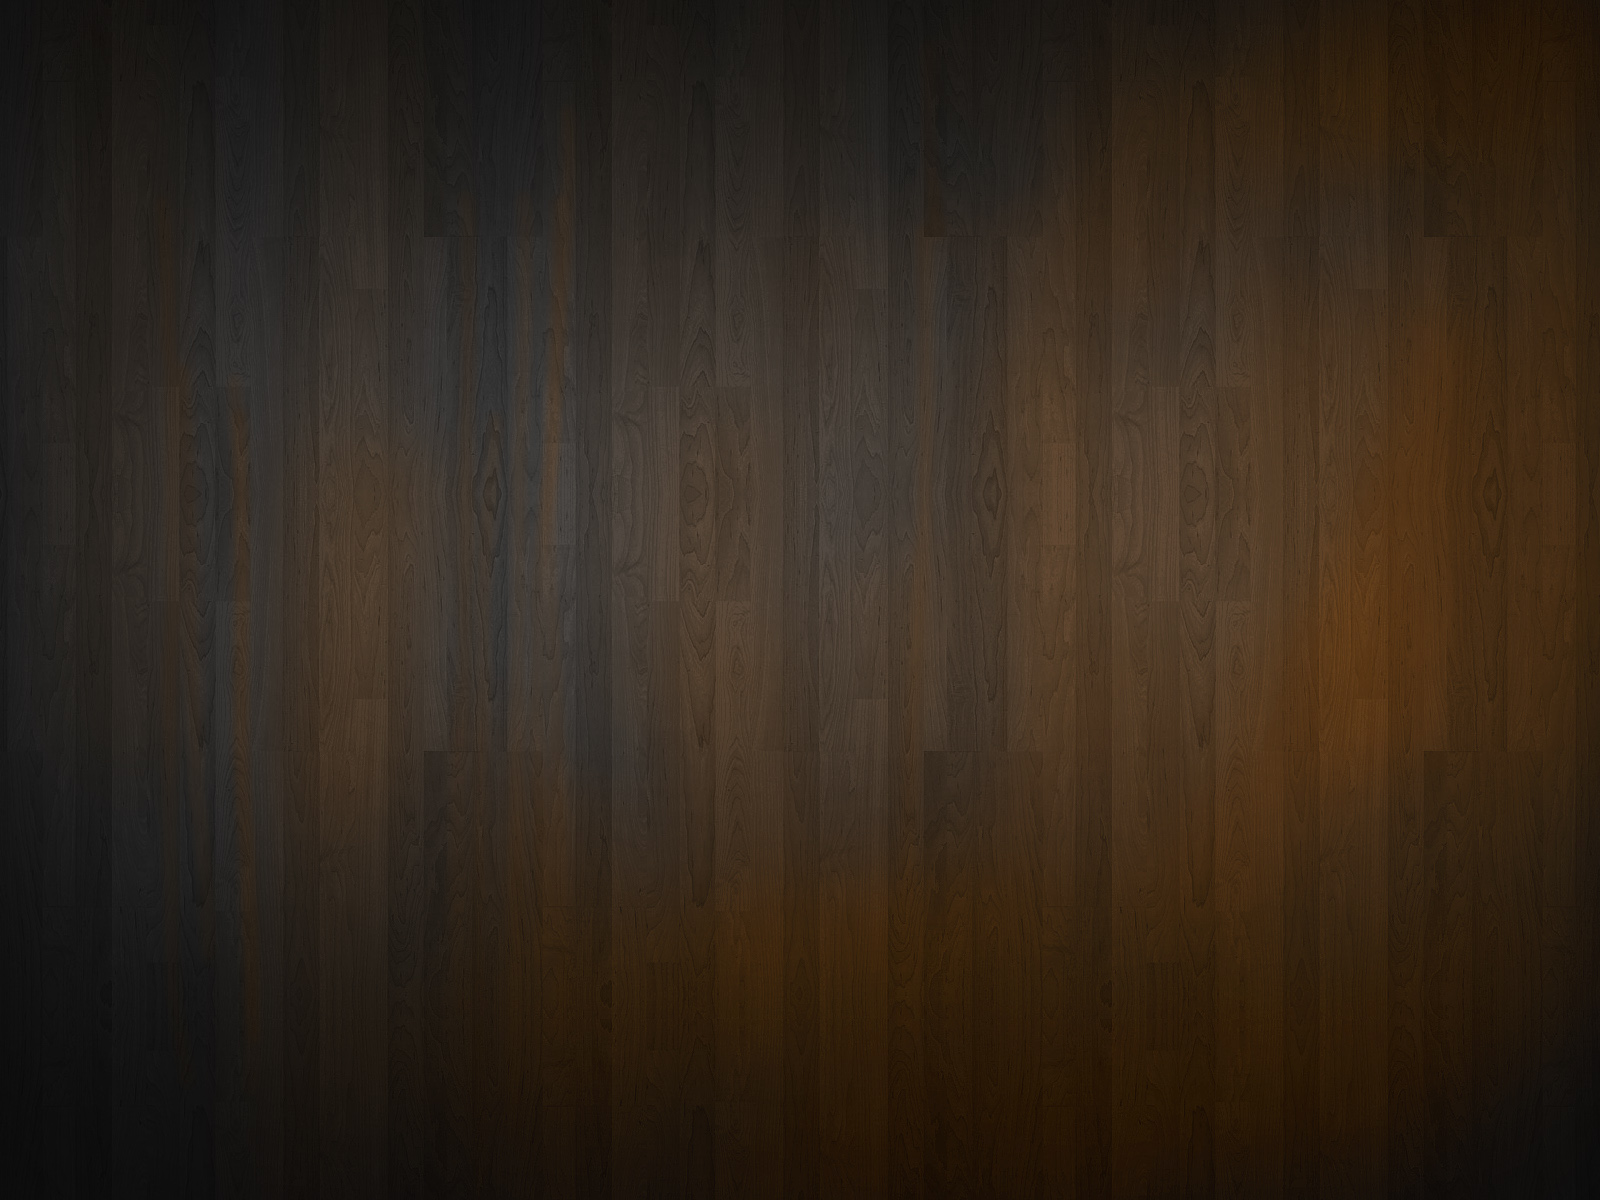 HD Wall Wood Wallpaper Picture Image Jpg